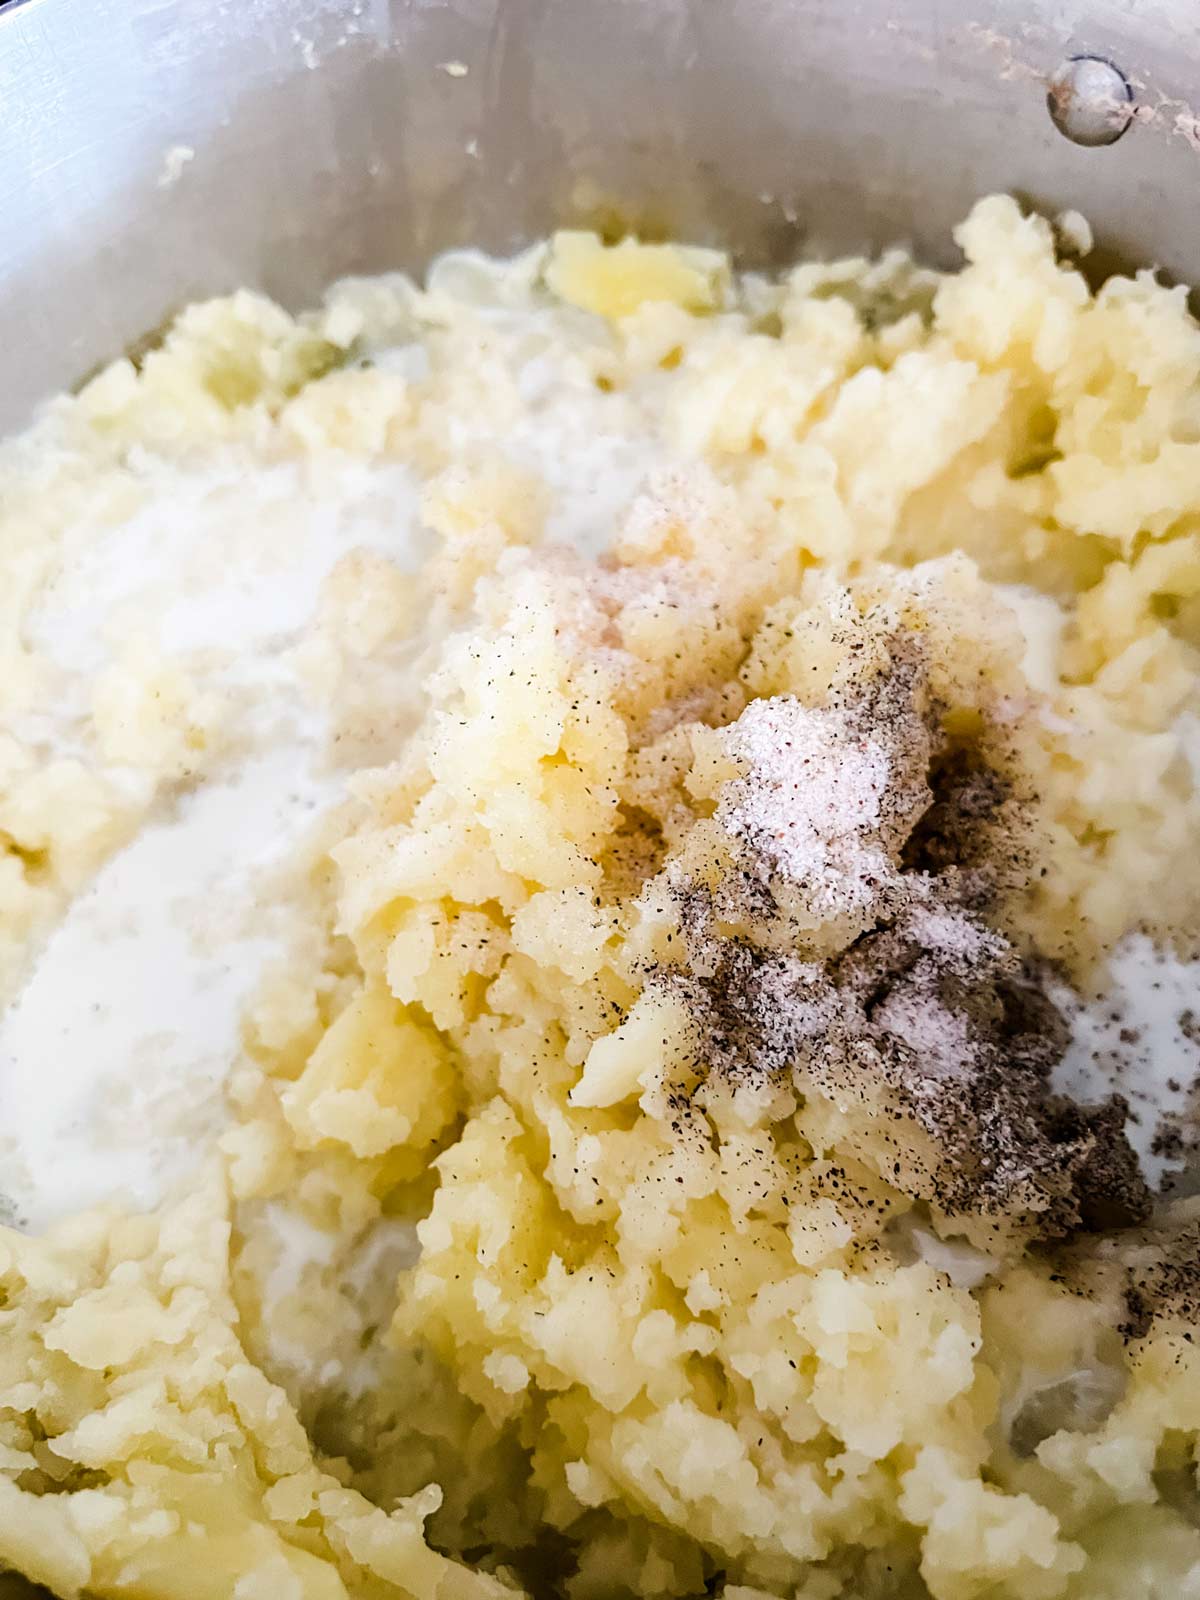 Seasonings and cream being added to mashed potatoes.